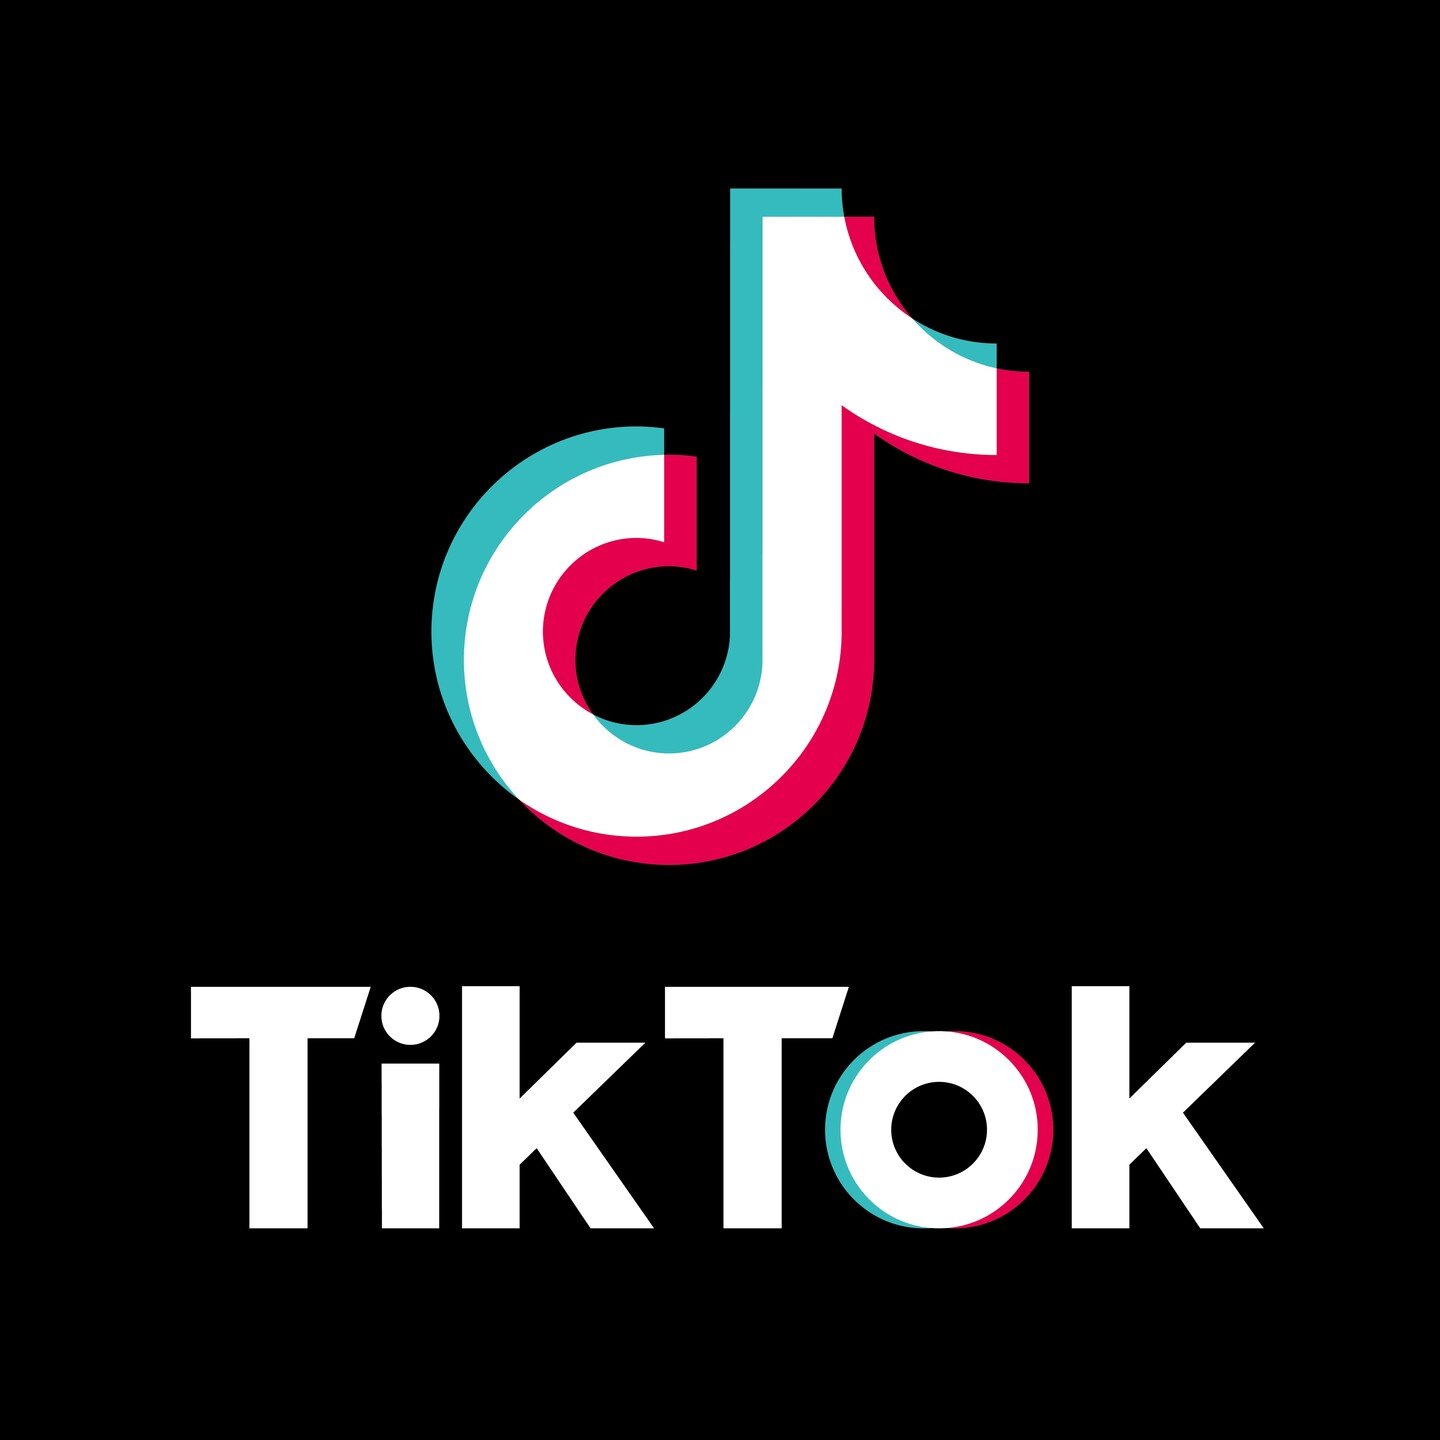 🎉SPONSOR HIGHLIGHT🎉: TikTok

@tiktok is video-hosting social media platform that connects people around the world, with over 1.5 billion installs! Thank you TikTok for sponsoring Hack with a Pro 2.0!